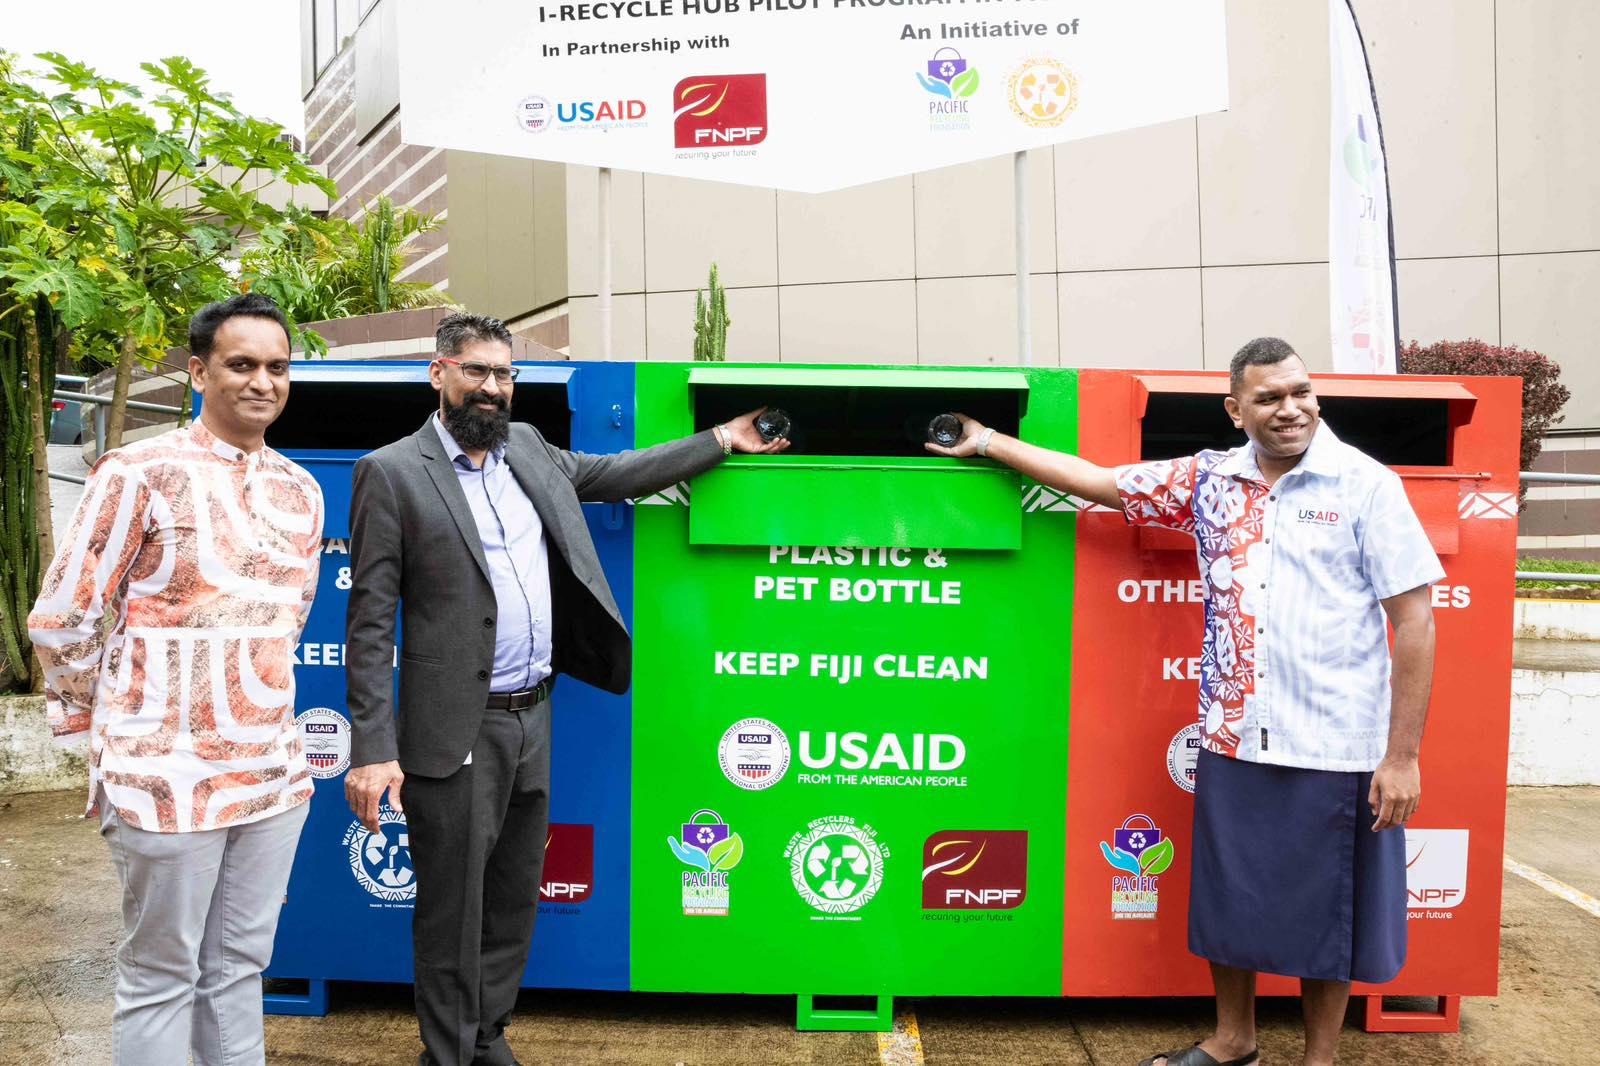 Three men pose in front of multicolored recycling bins, smiling as they drop glass bottles into a central green bin.